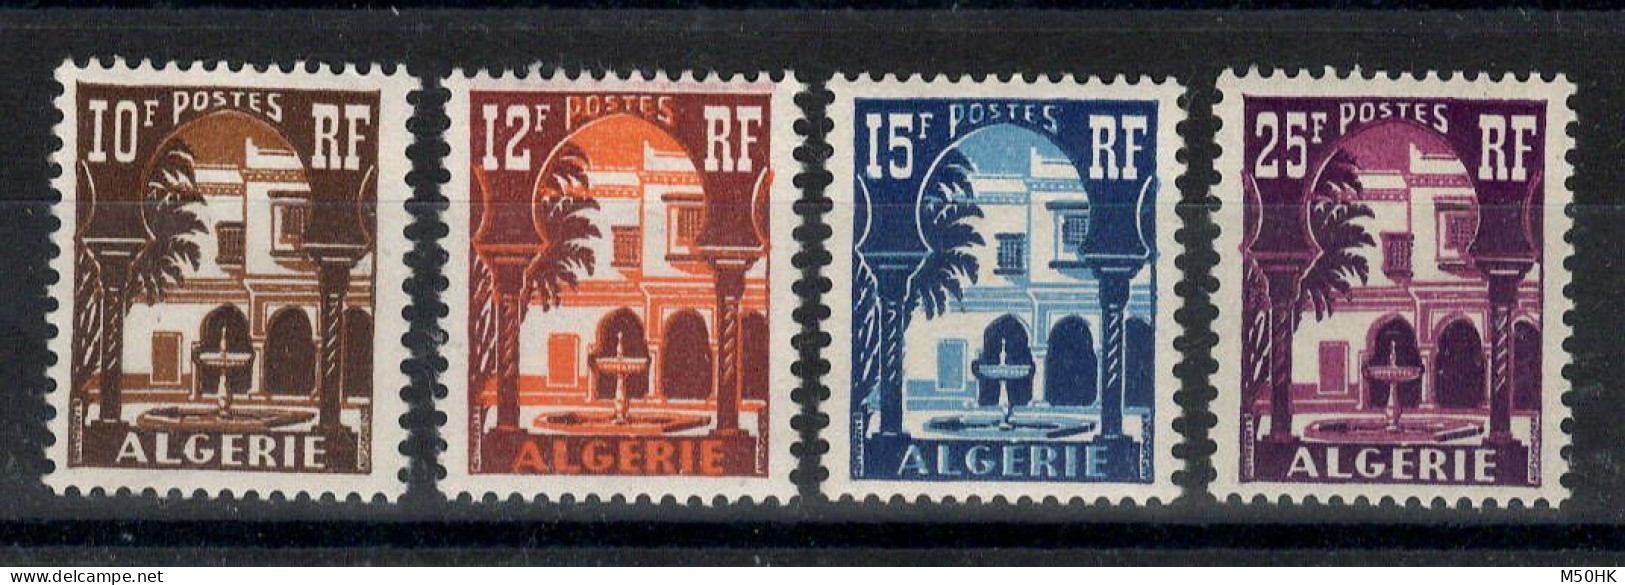 Algerie - YV 313A à 314A N** MNH Luxe Complète Musee Du Bardo , Cote 5 Euros - Unused Stamps